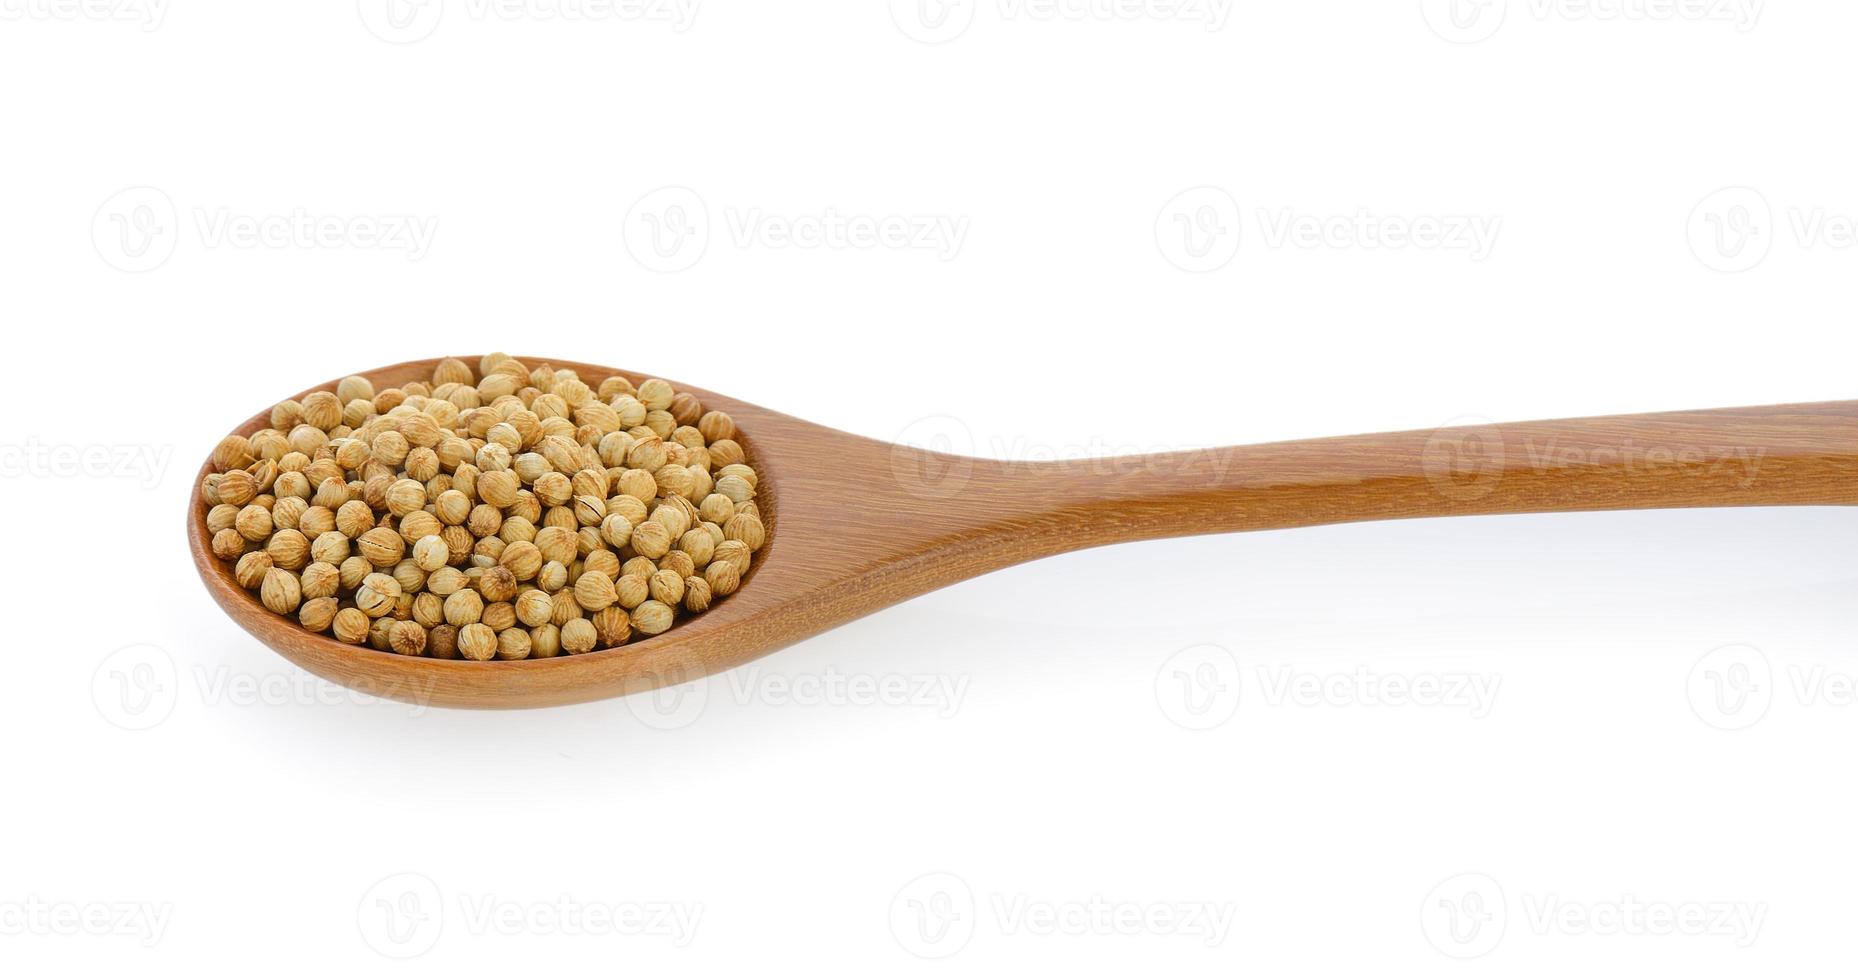 Coriander seeds in wood spoon on white background photo